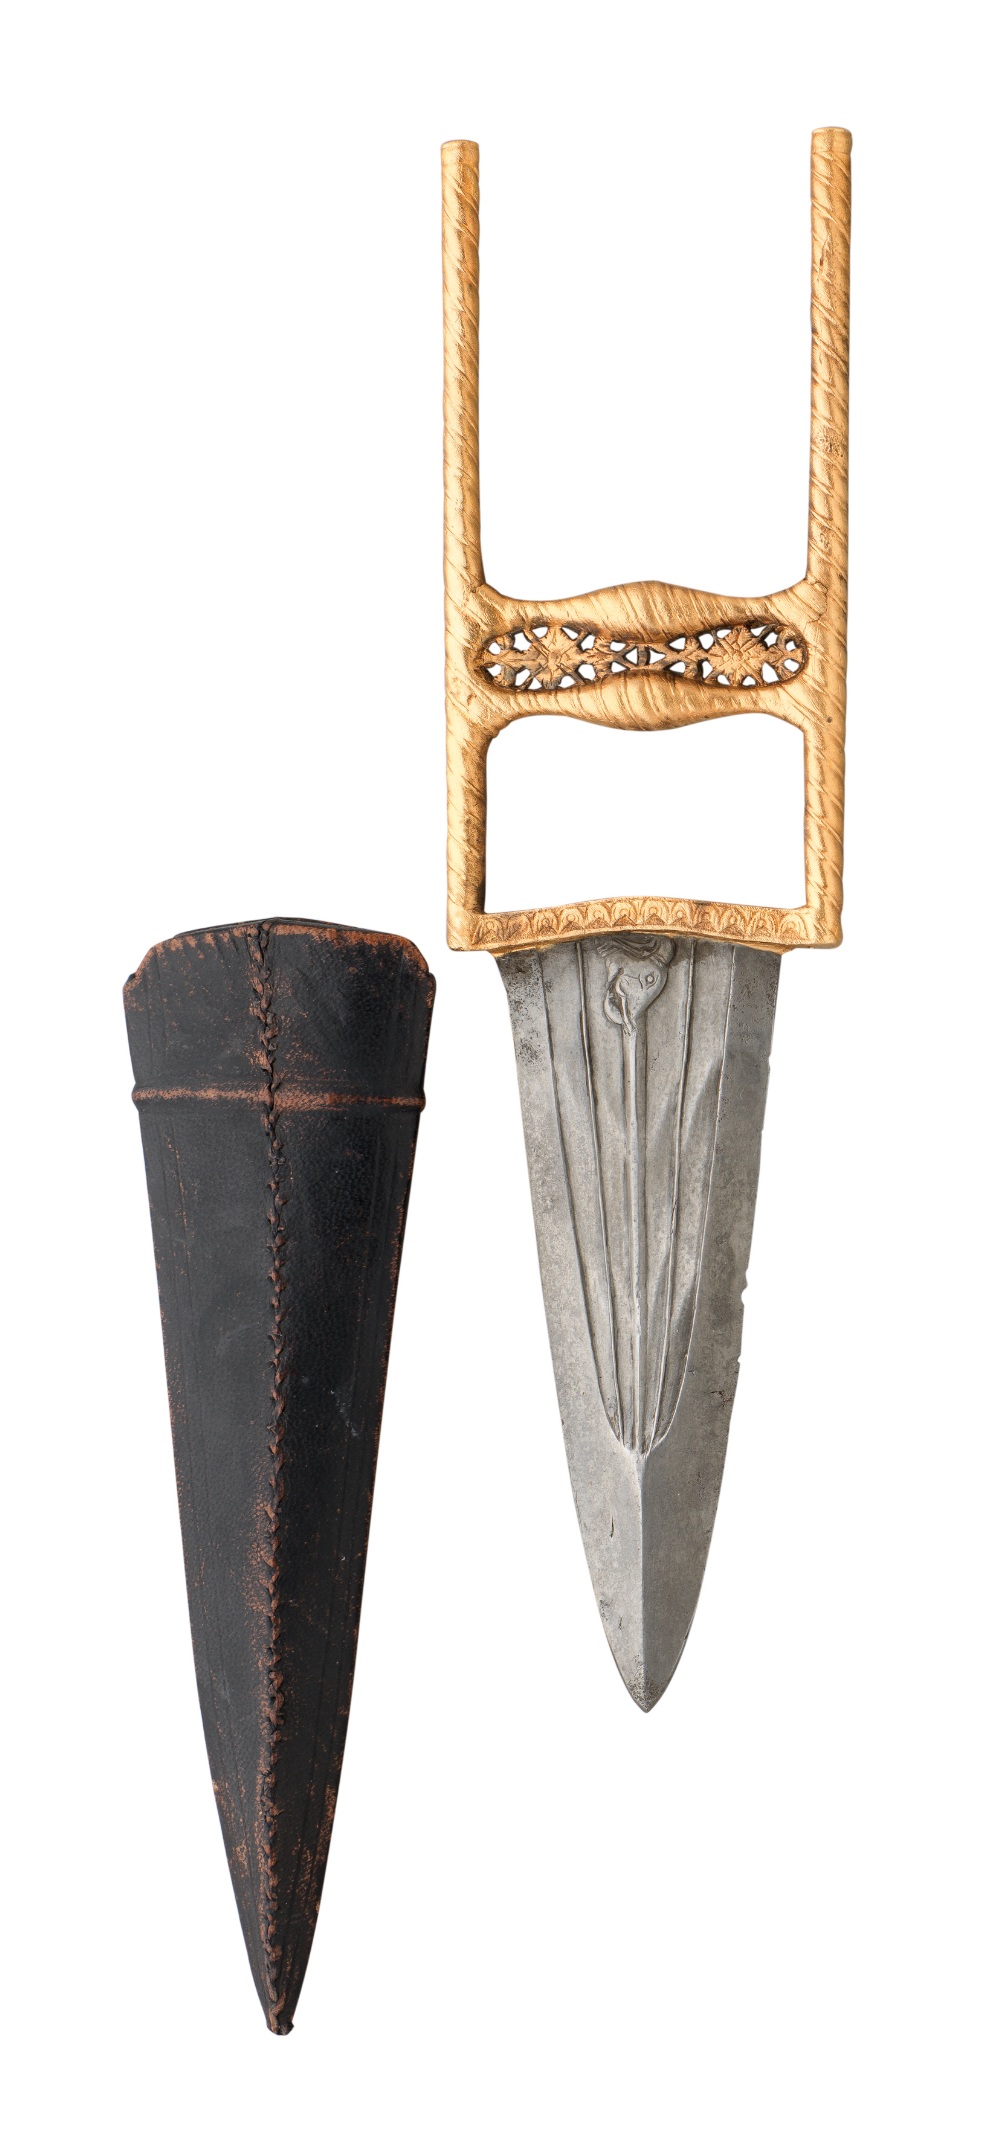 AN INDIAN DAGGER (KATAR), RAJASTHAN, MID-19TH CENTURY with tapering blade formed with a reinforced